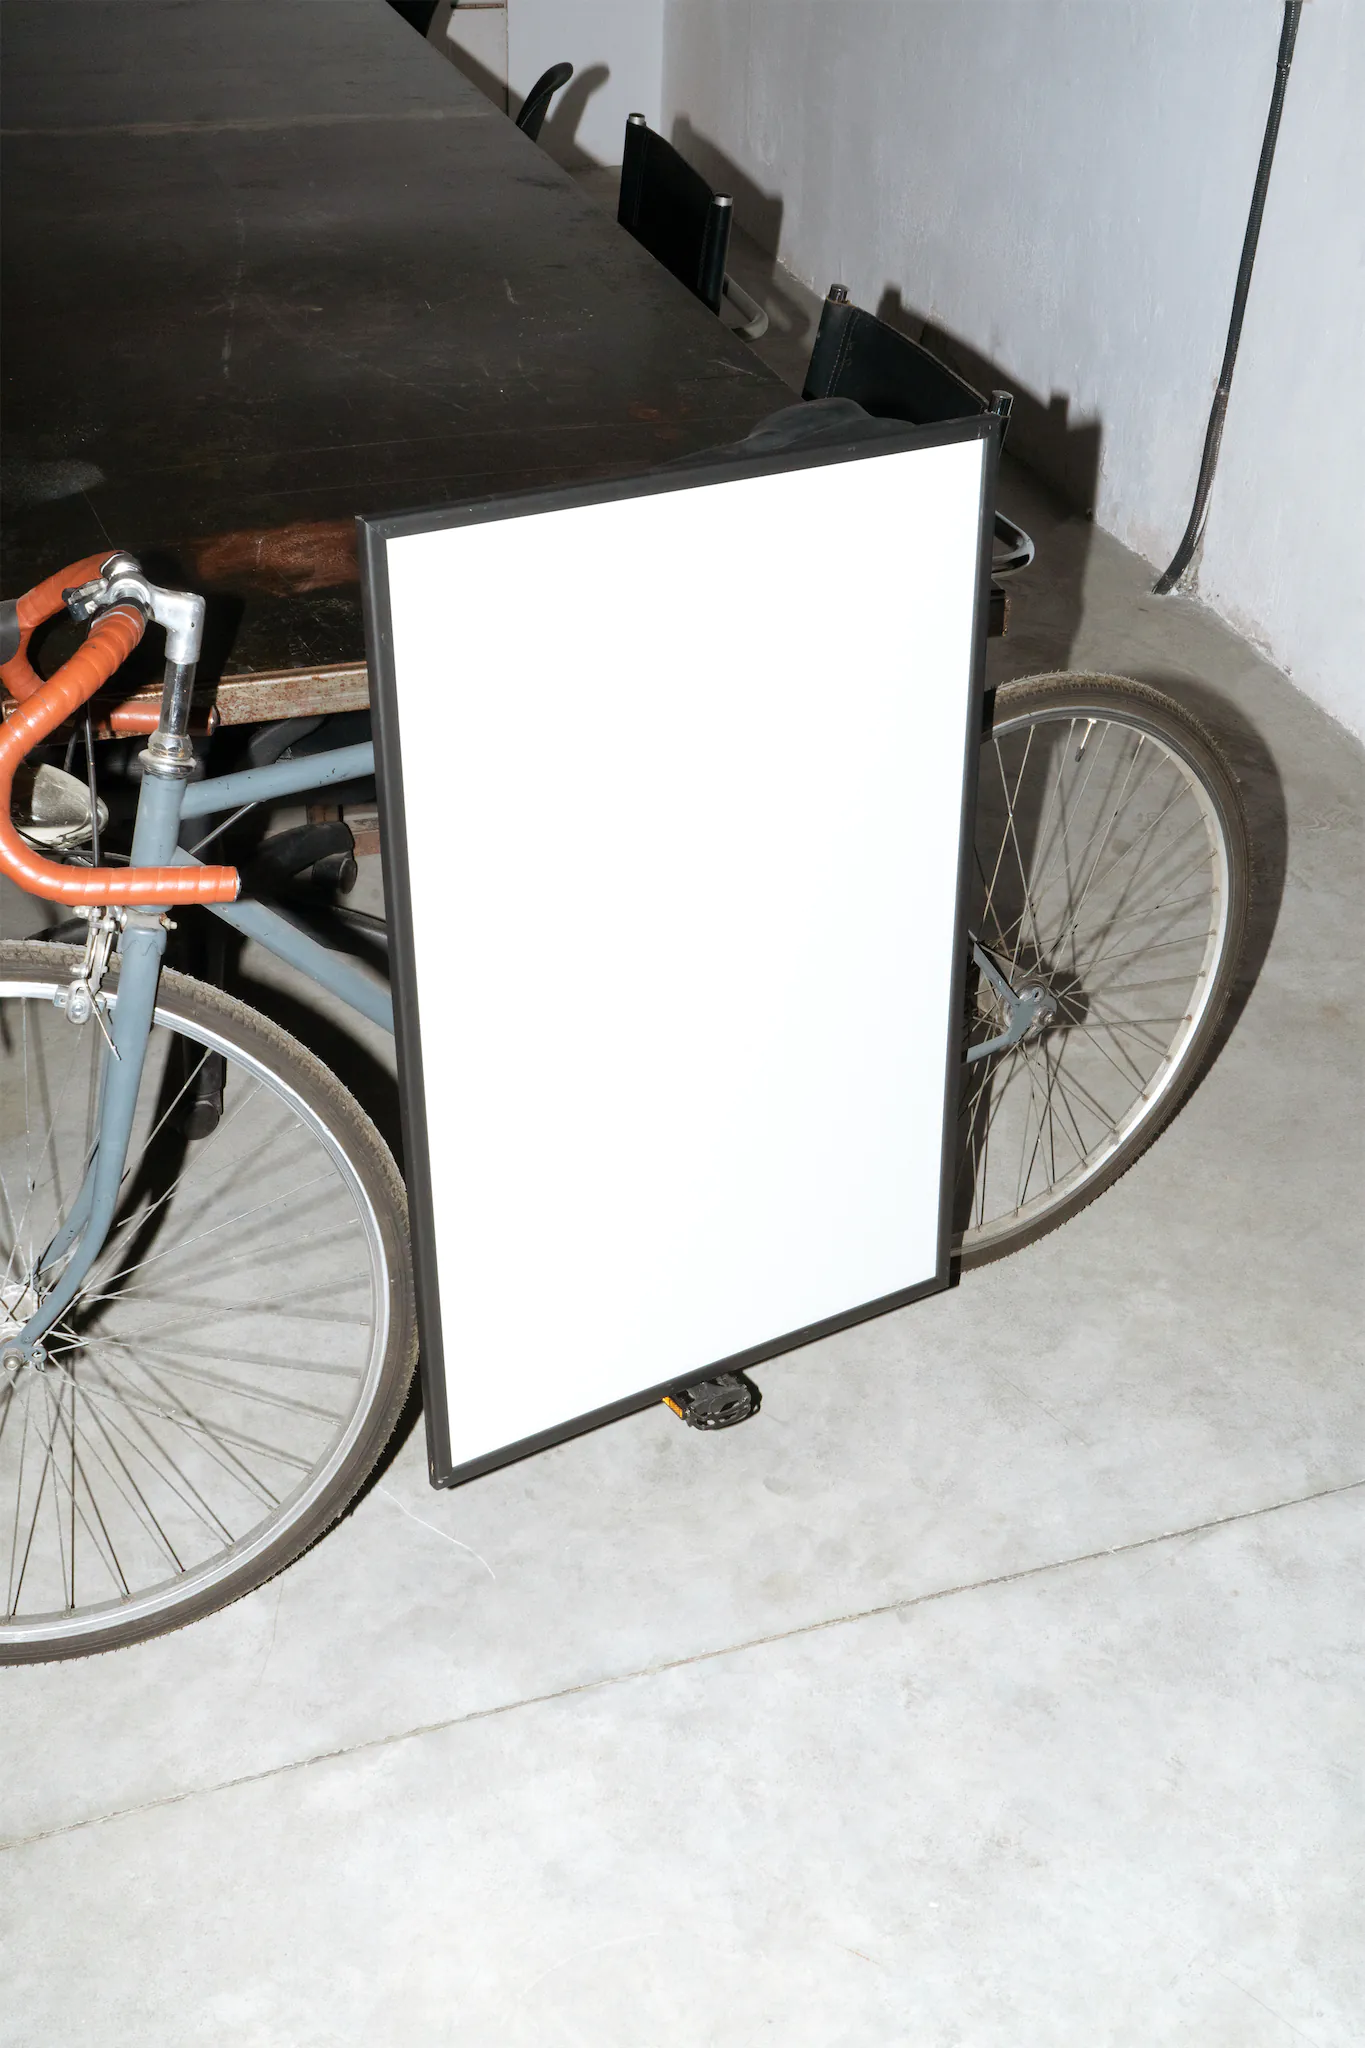 Framed poster on a pedal of a bicycle